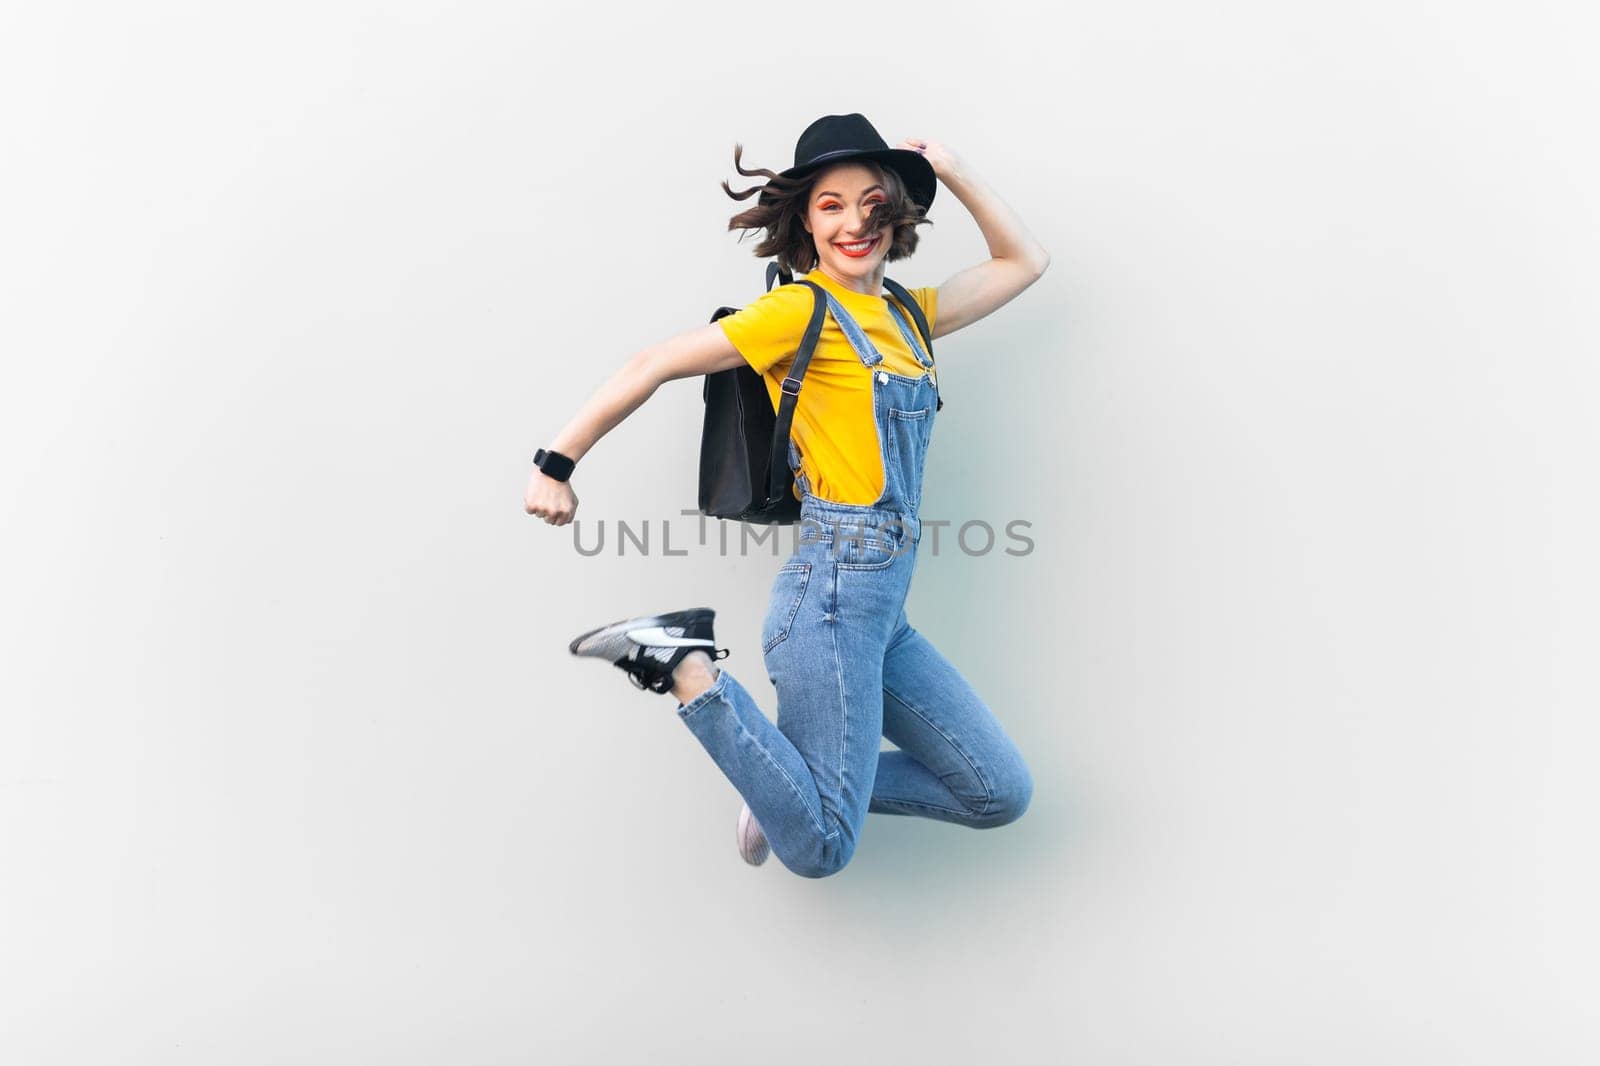 Portrait of attractive overjoyed hipster woman in blue denim overalls, yellow T-shirt and black hat, jumping, being in good mood, expressing happiness. Indoor studio shot isolated on gray background.